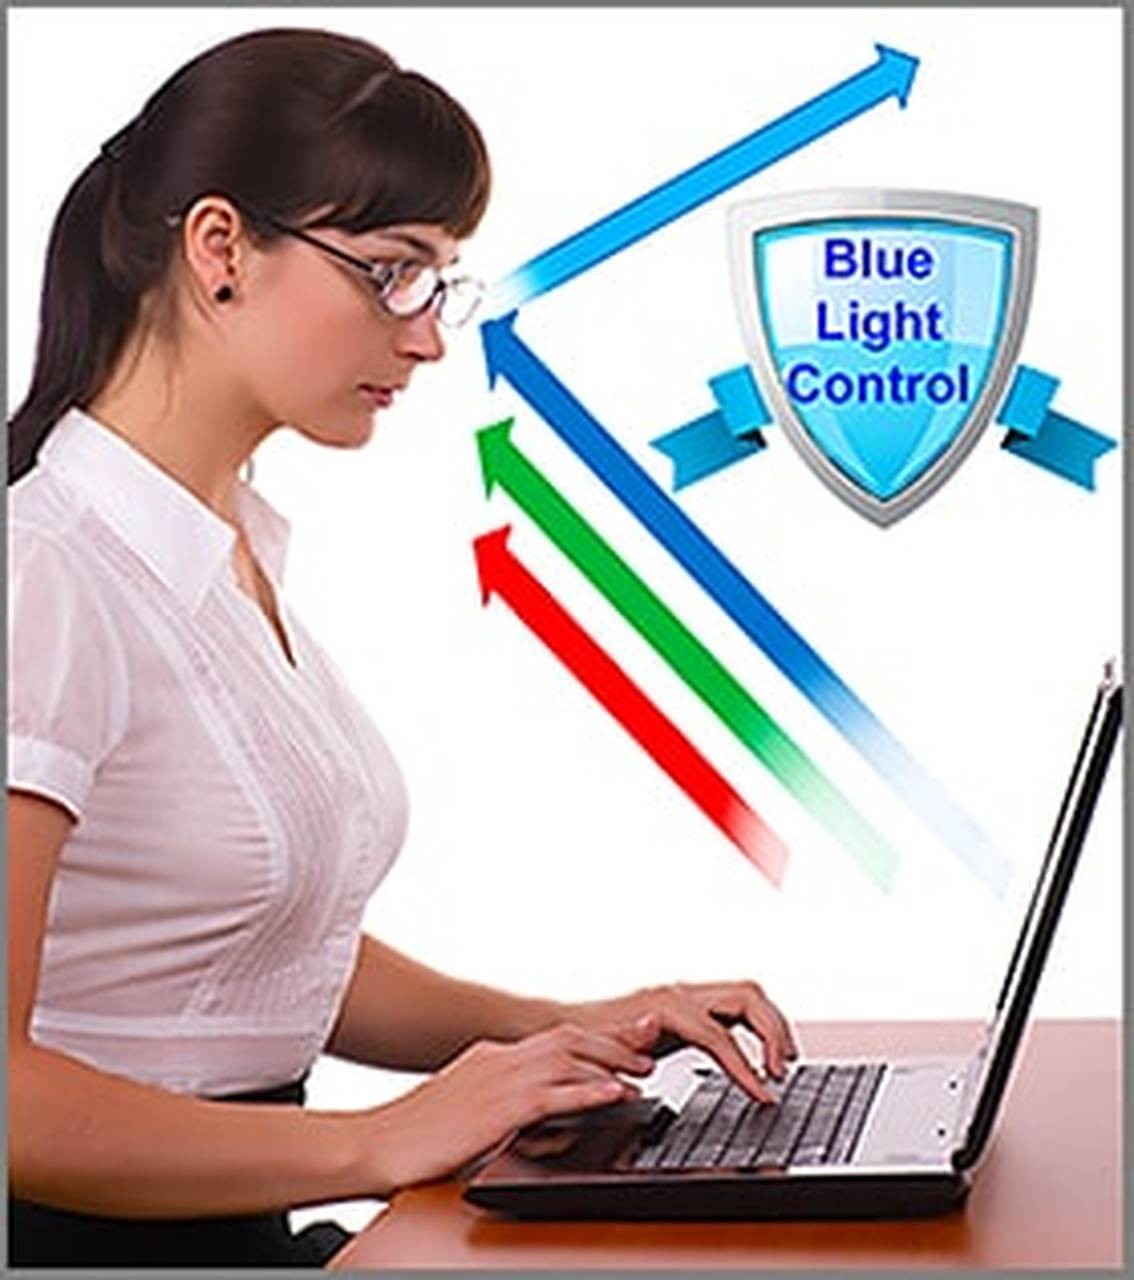 Blue Light Protection